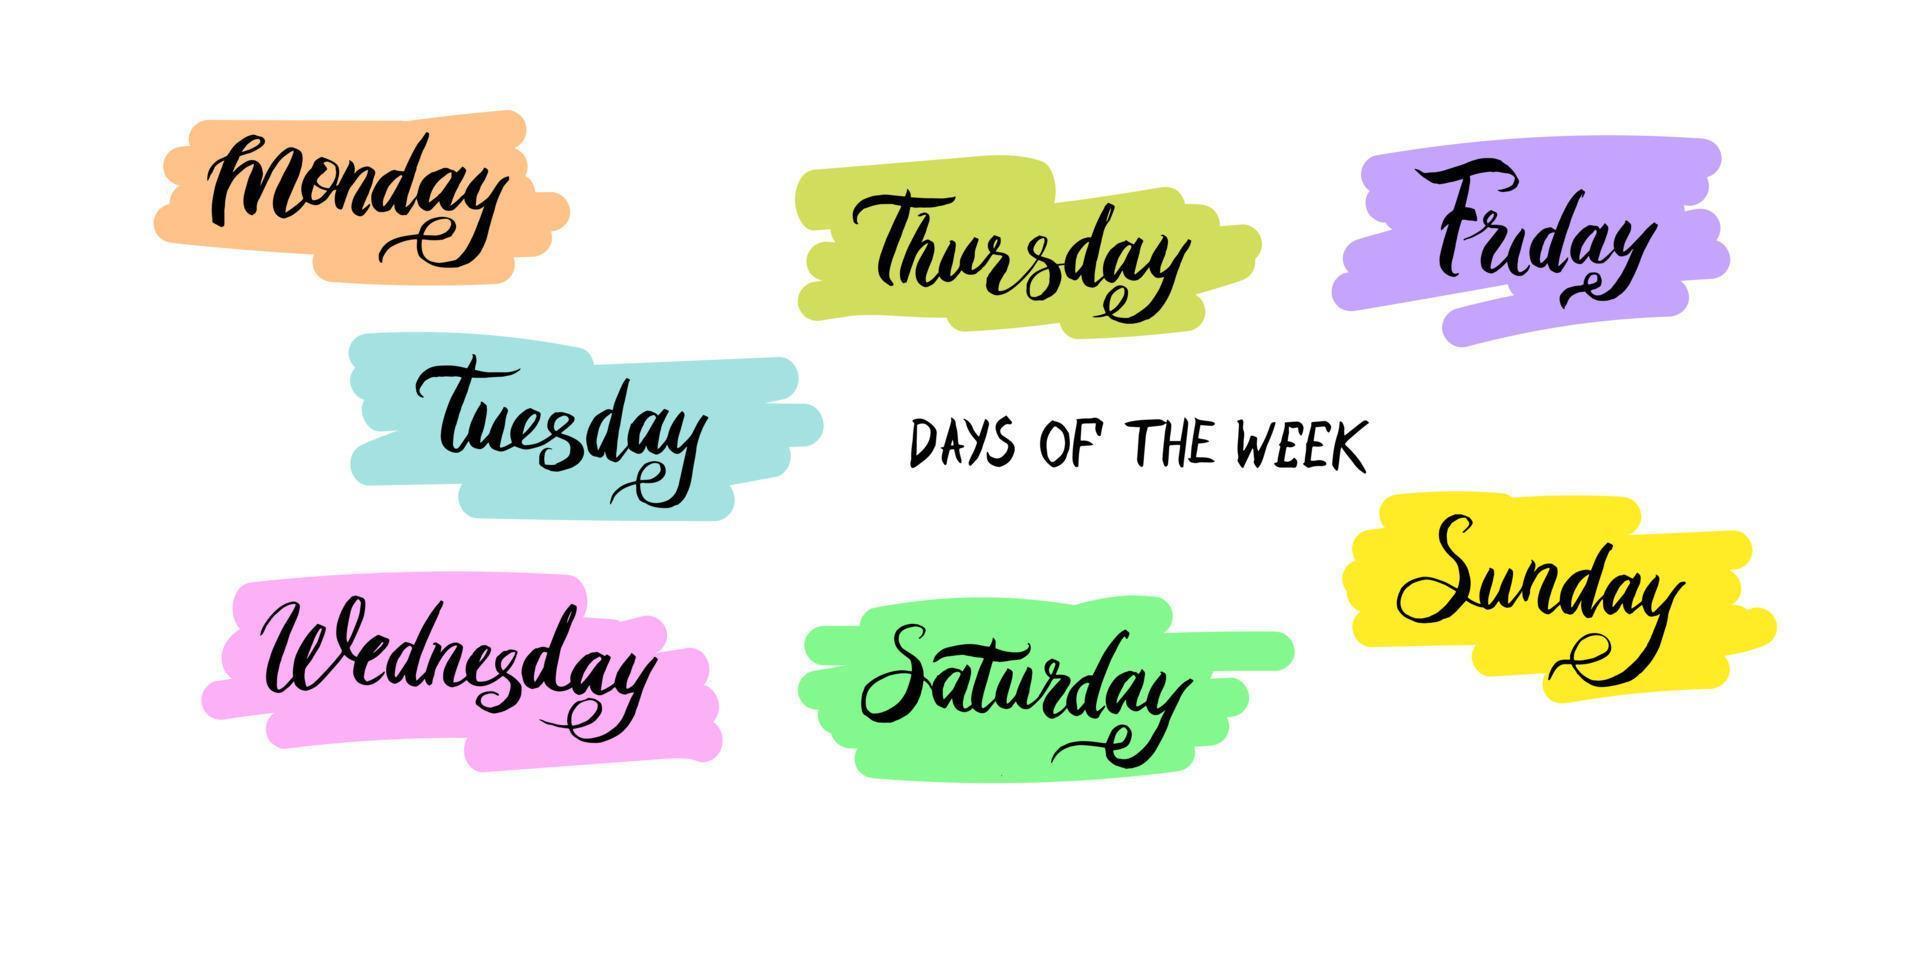 Days of the week in lettering. Monday, Tuesday, Wednesday, Thursday, Friday, Saturday, Sunday. vector